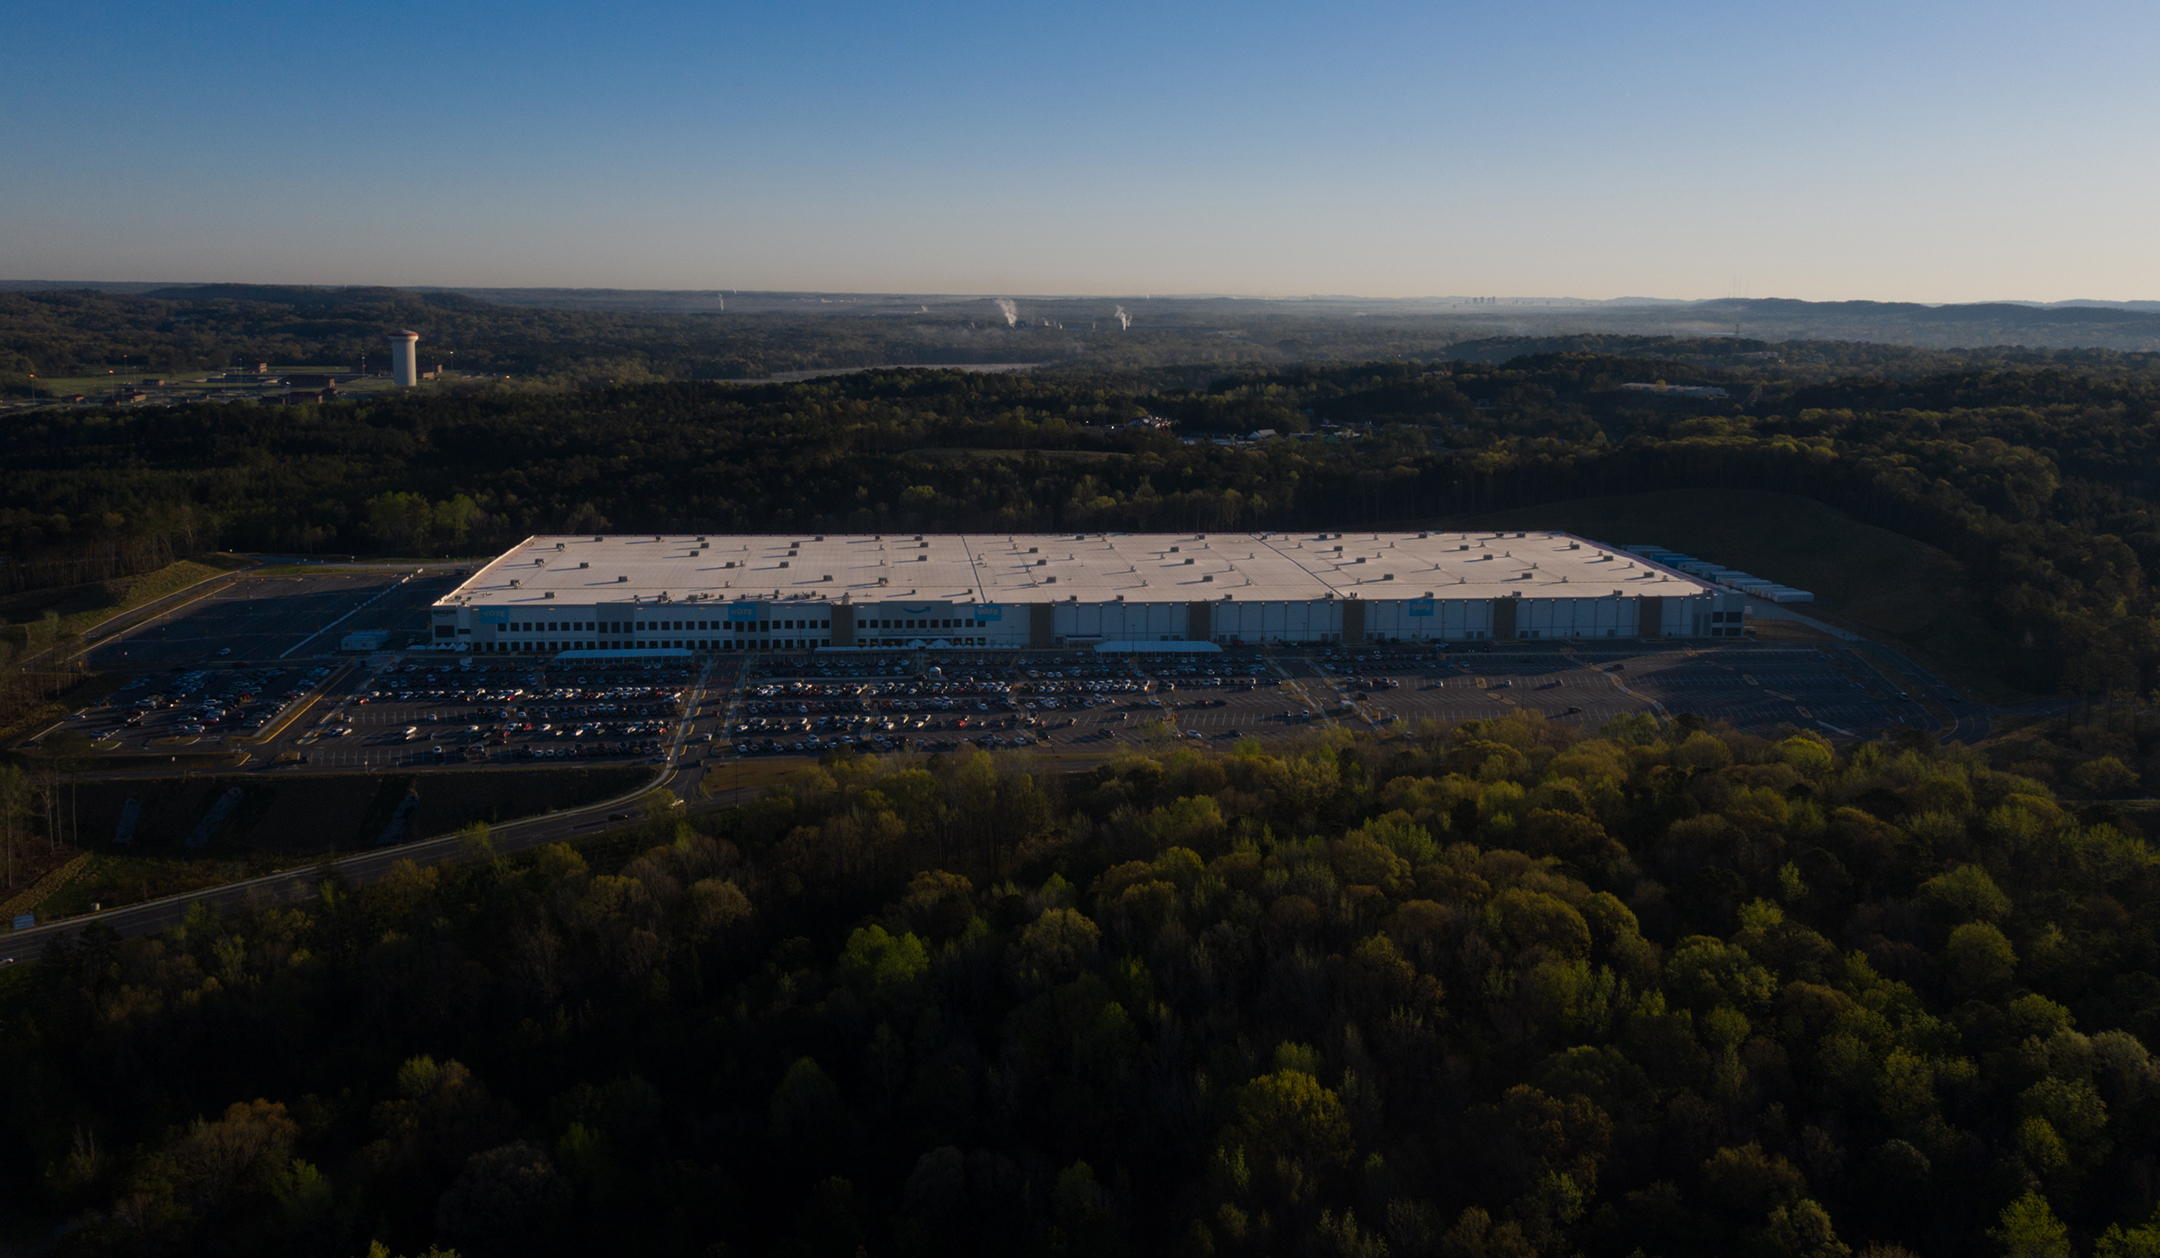 View of a large Amazon warehouse seen from the air, set in a rural landscape of forests and empty spaces